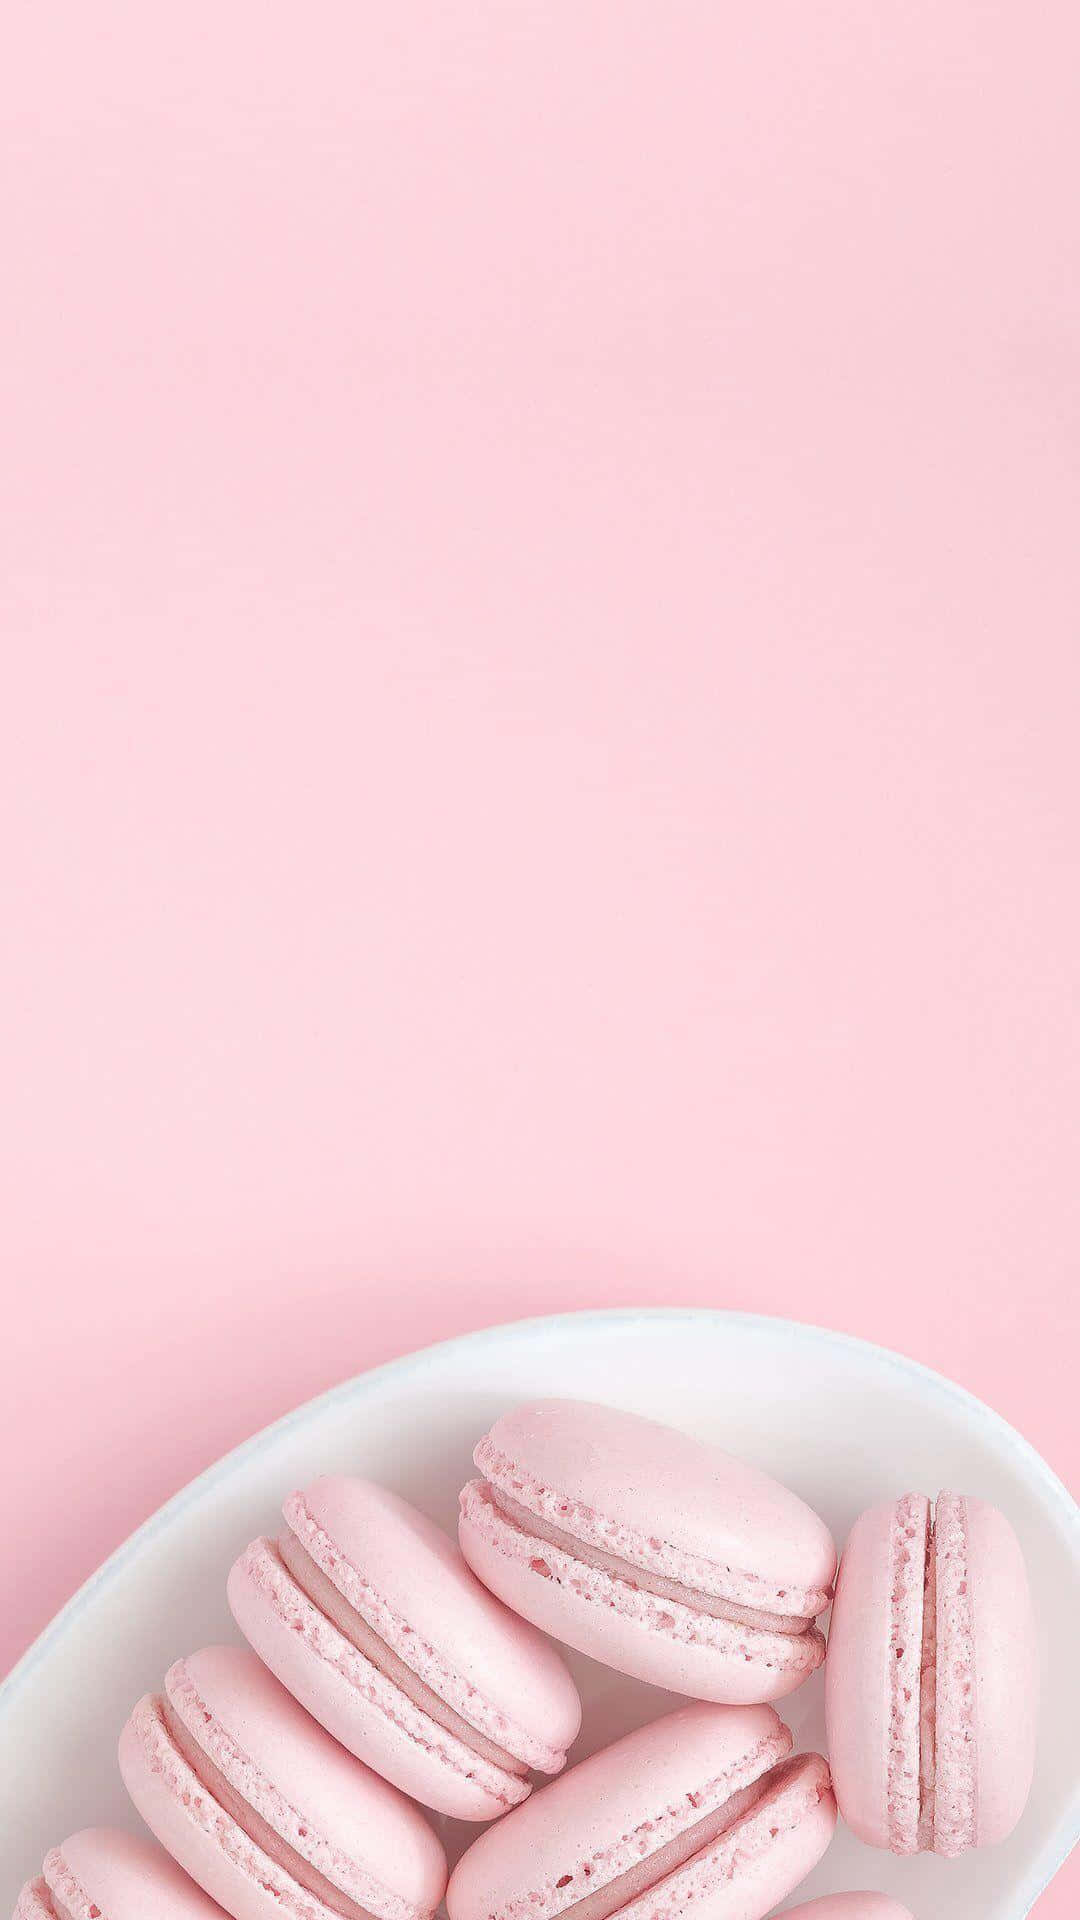 Pink Macarons On A Plate On A Pink Background Wallpaper